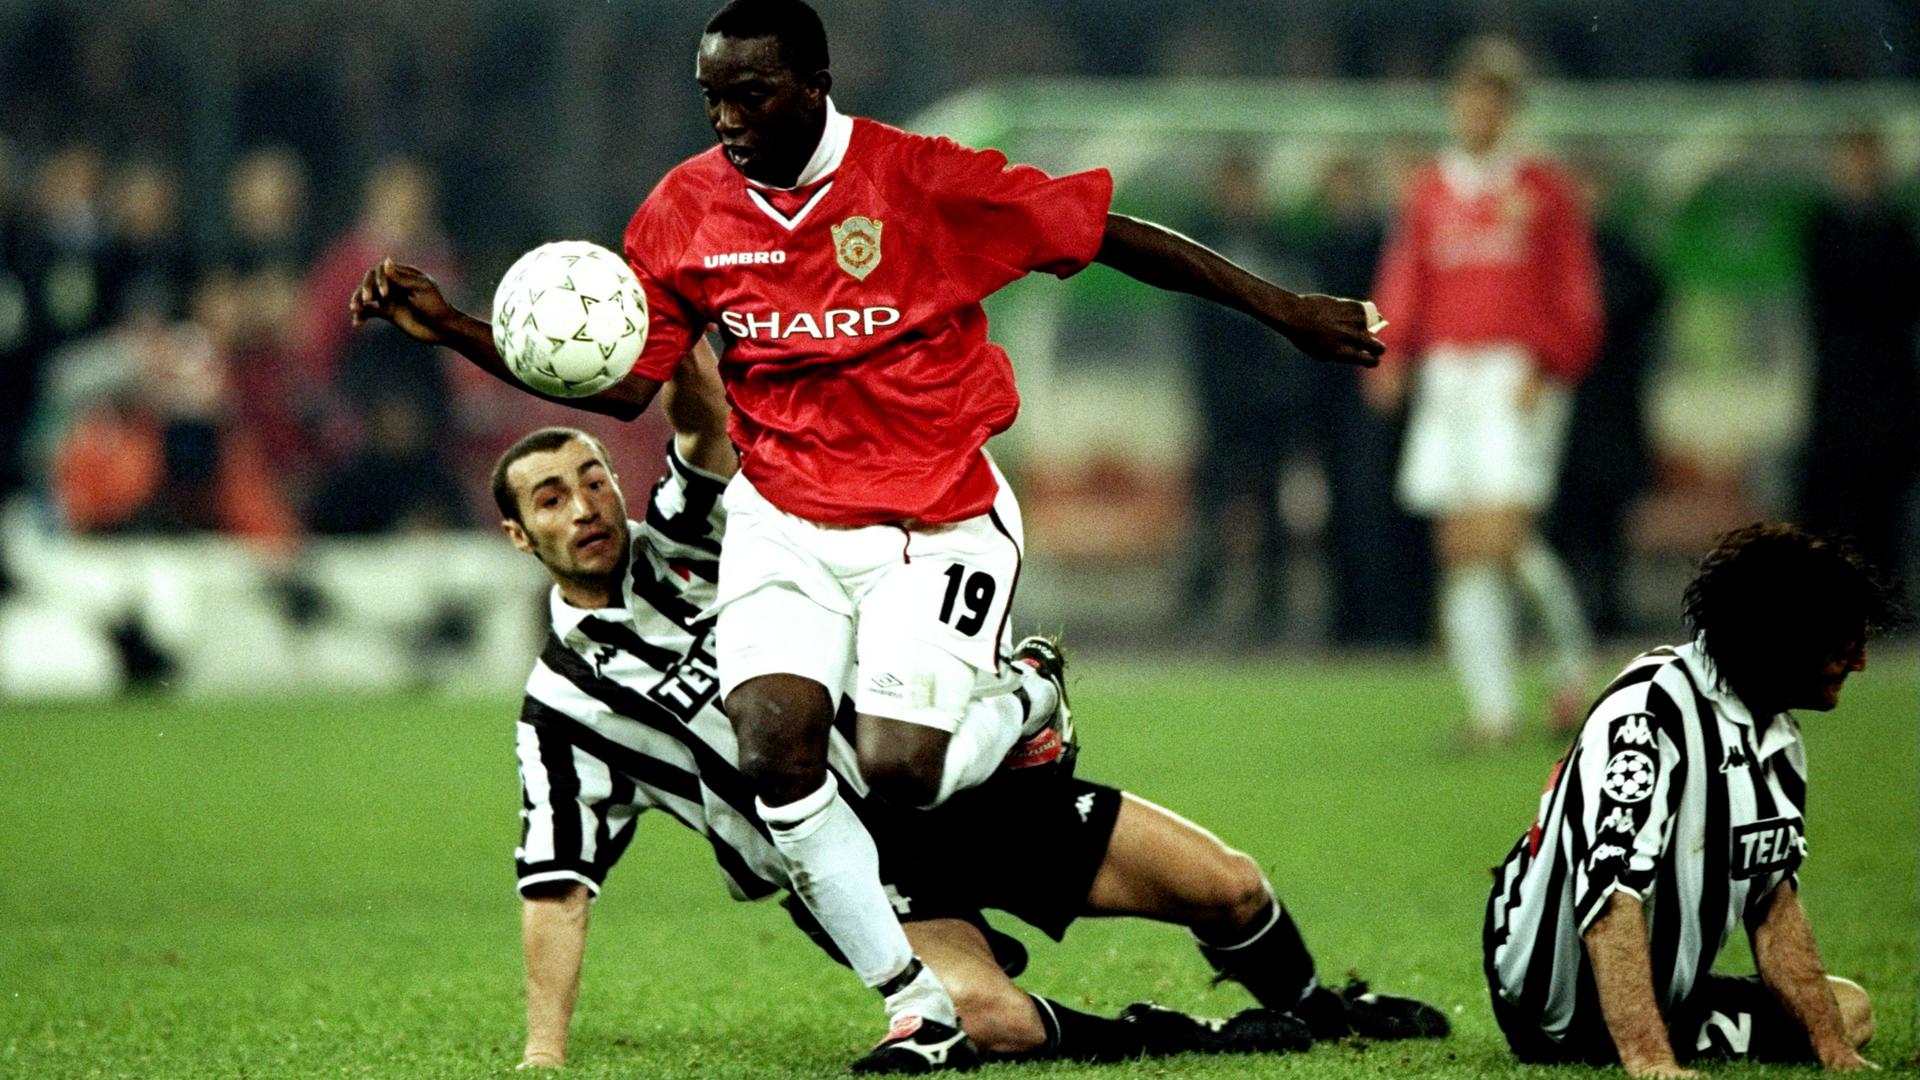 Match rewind in full Juventus 2 United 3 on 21 April 1999 Manchester United